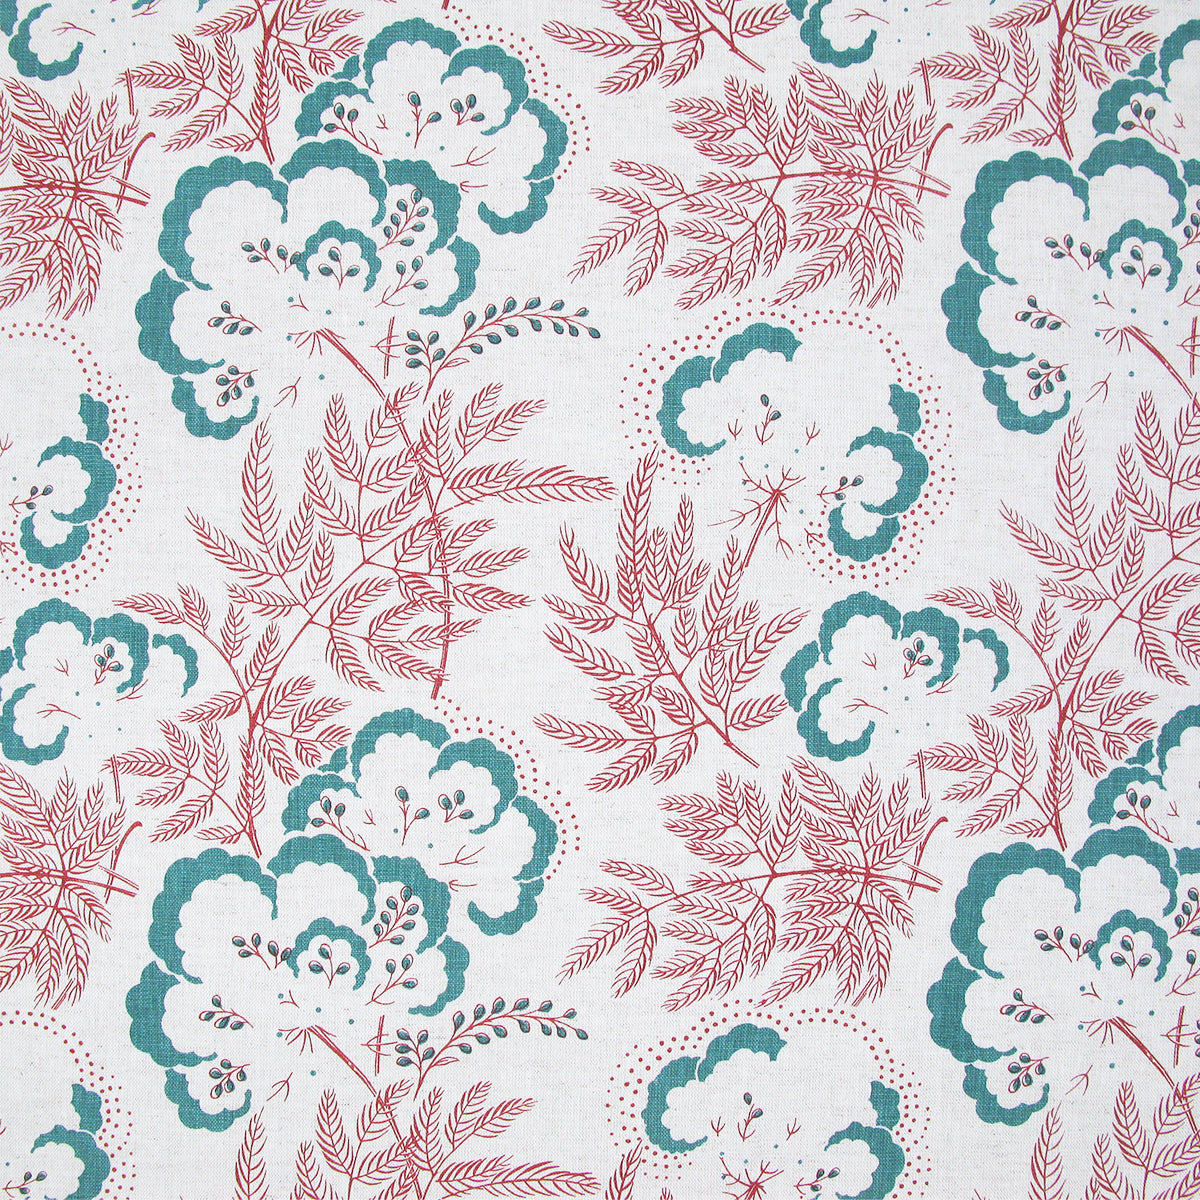 Detail of fabric in an intricate floral print in turquoise and pink on a white field.